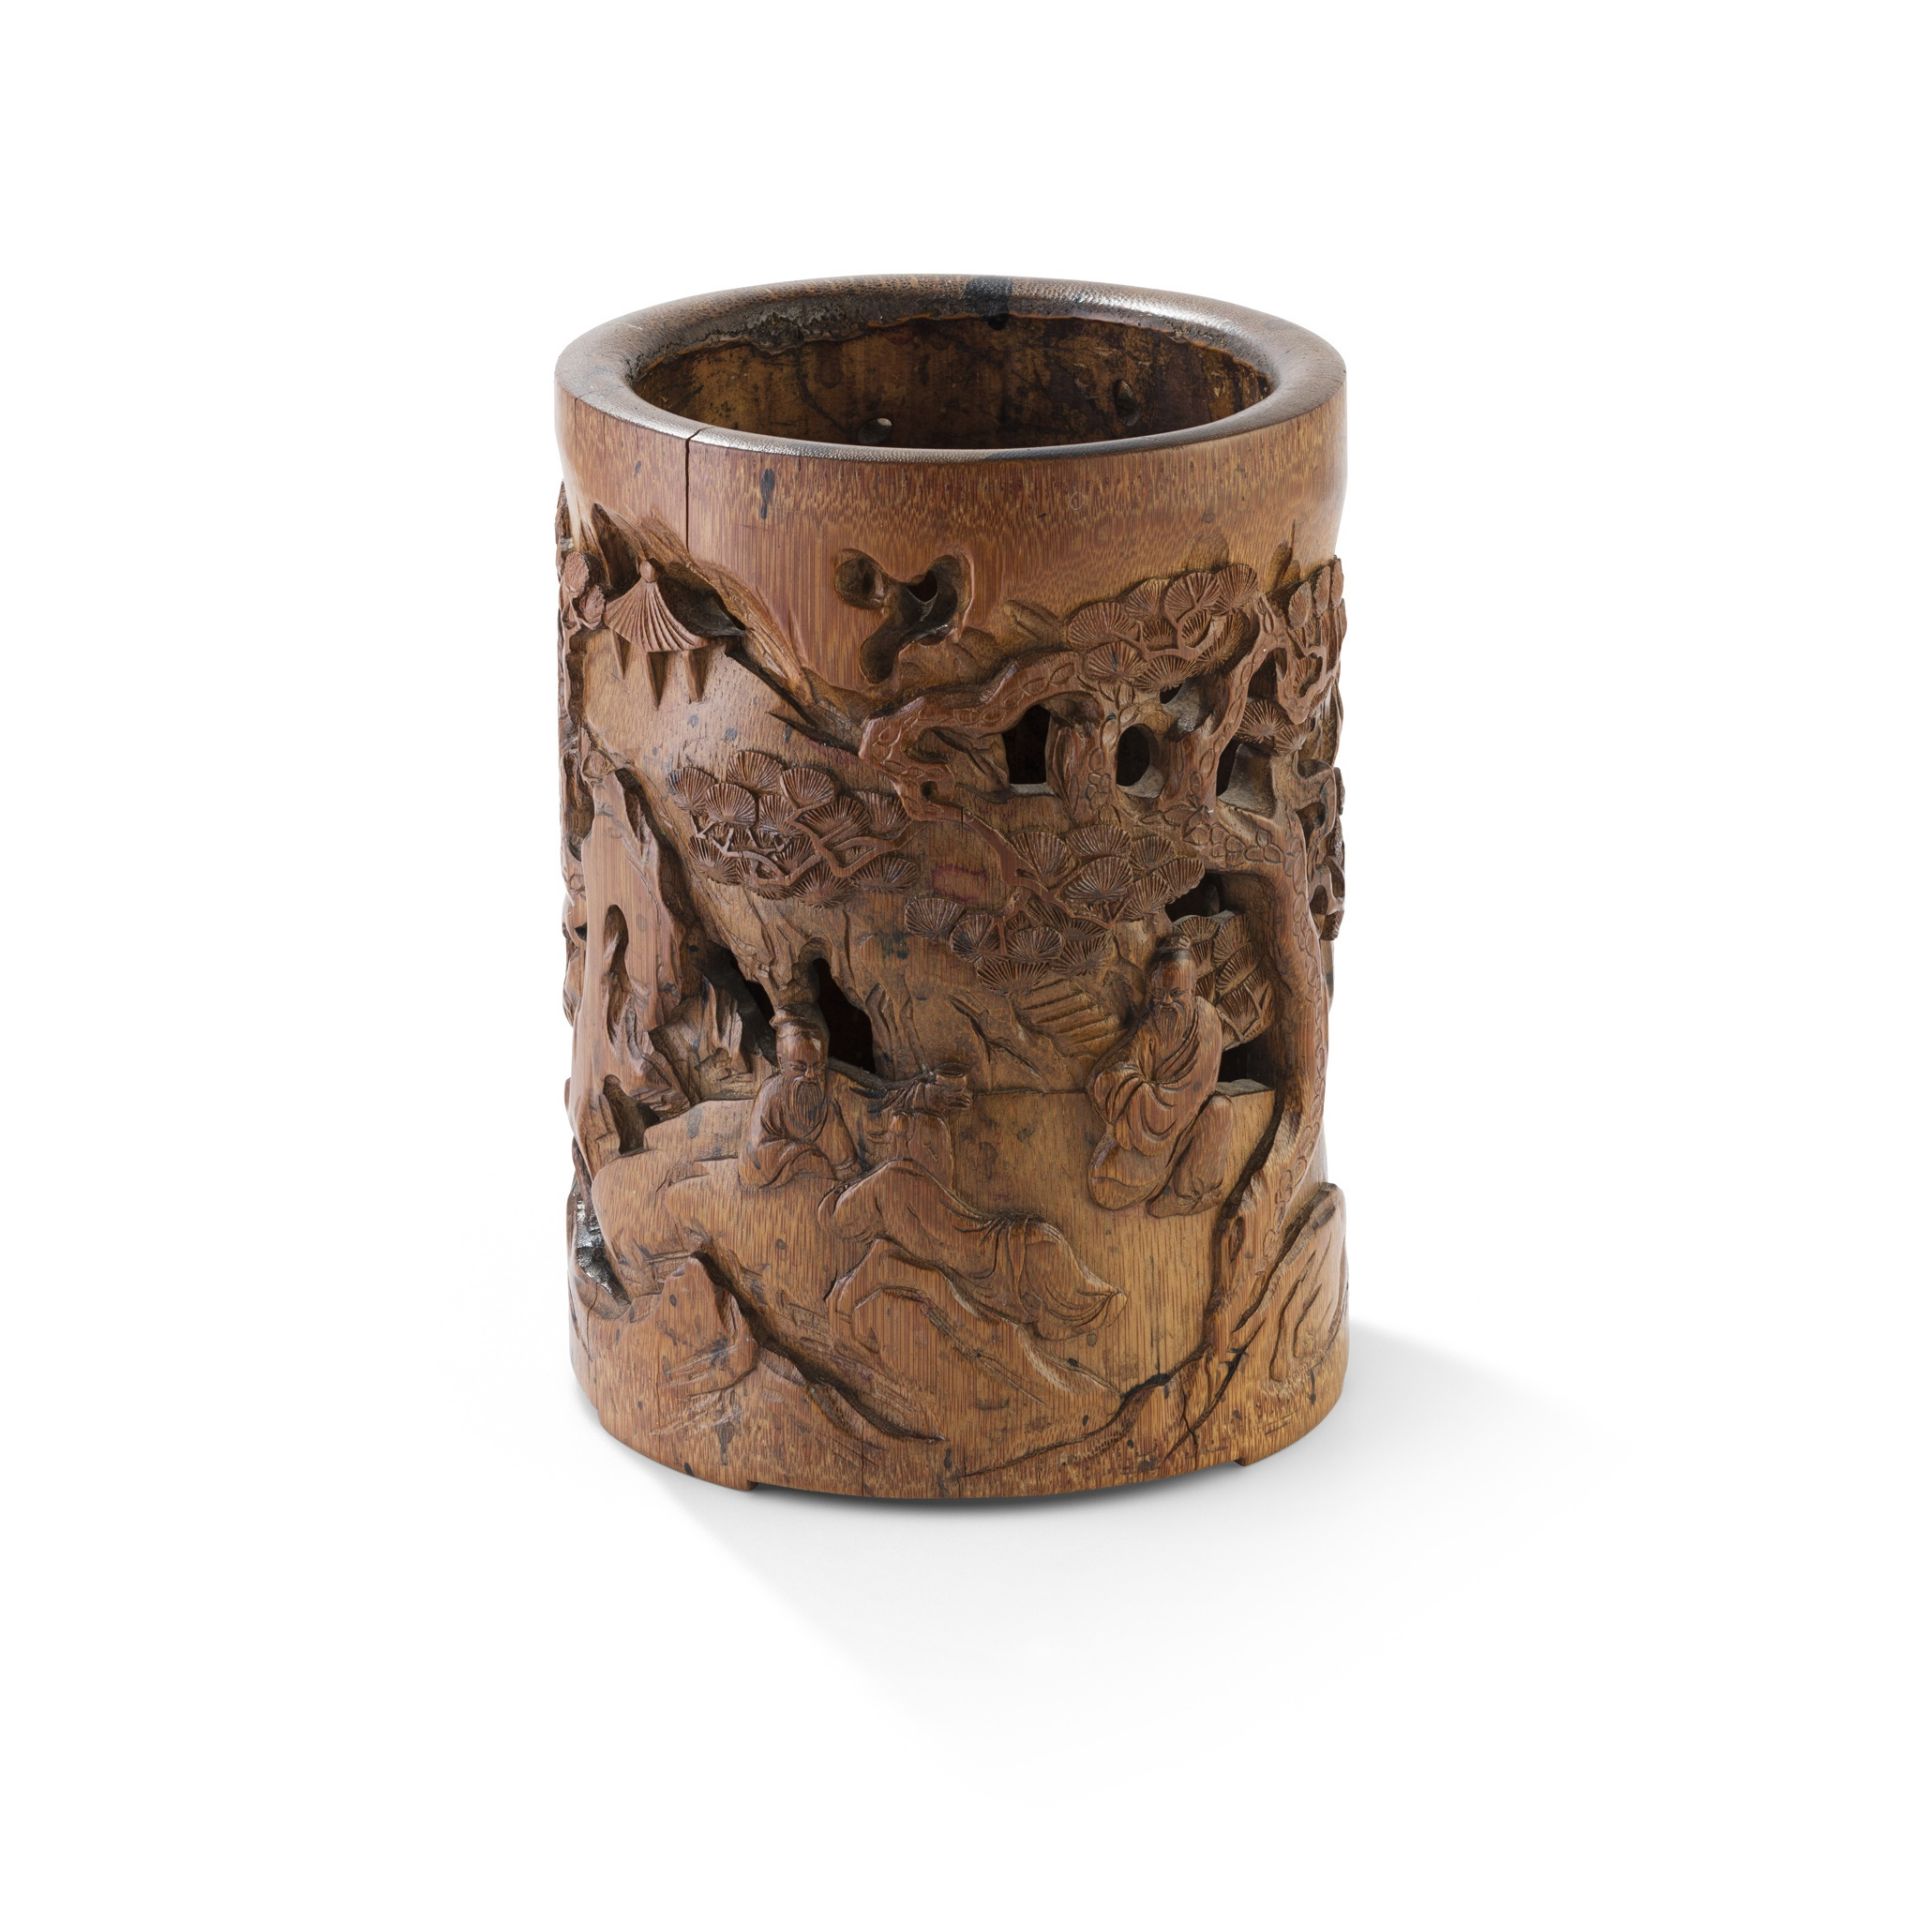 CARVED BAMBOO 'SCHOLAR AND PINE' BRUSH POT QING DYNASTY, 19TH CENTURY